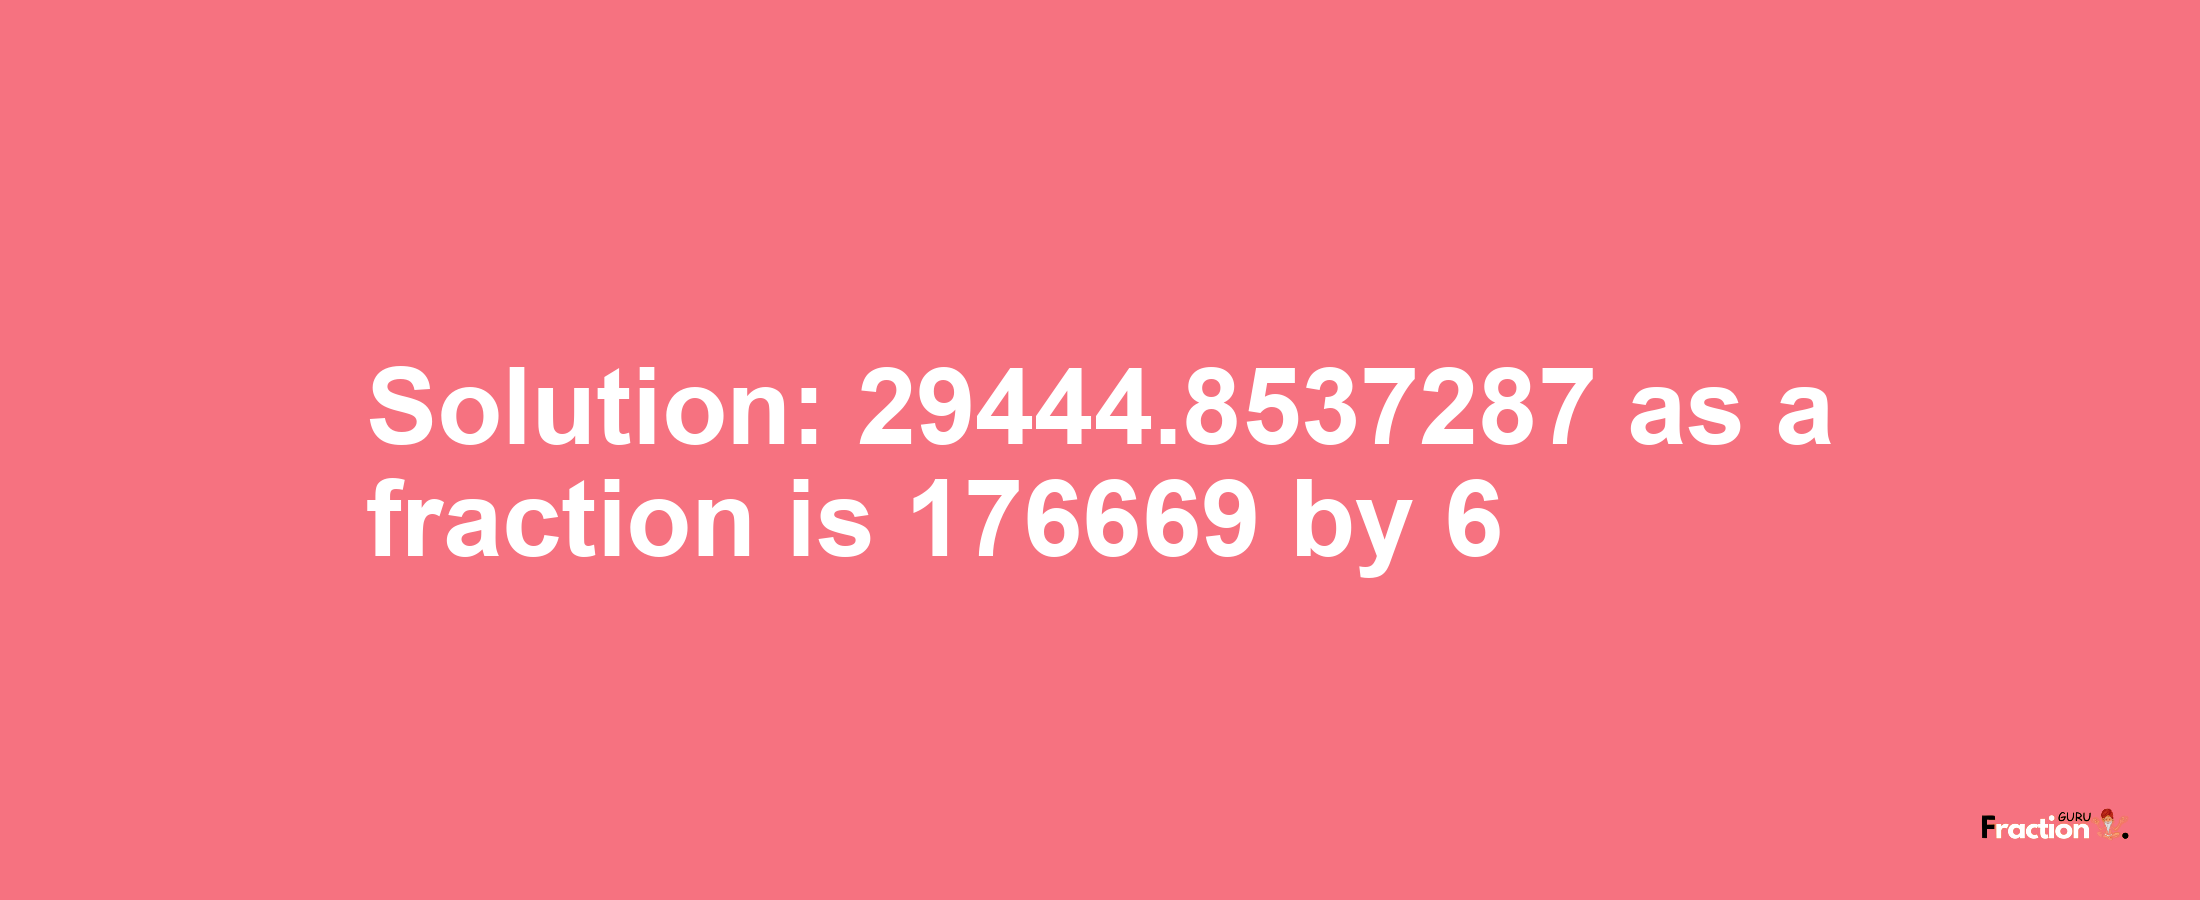 Solution:29444.8537287 as a fraction is 176669/6